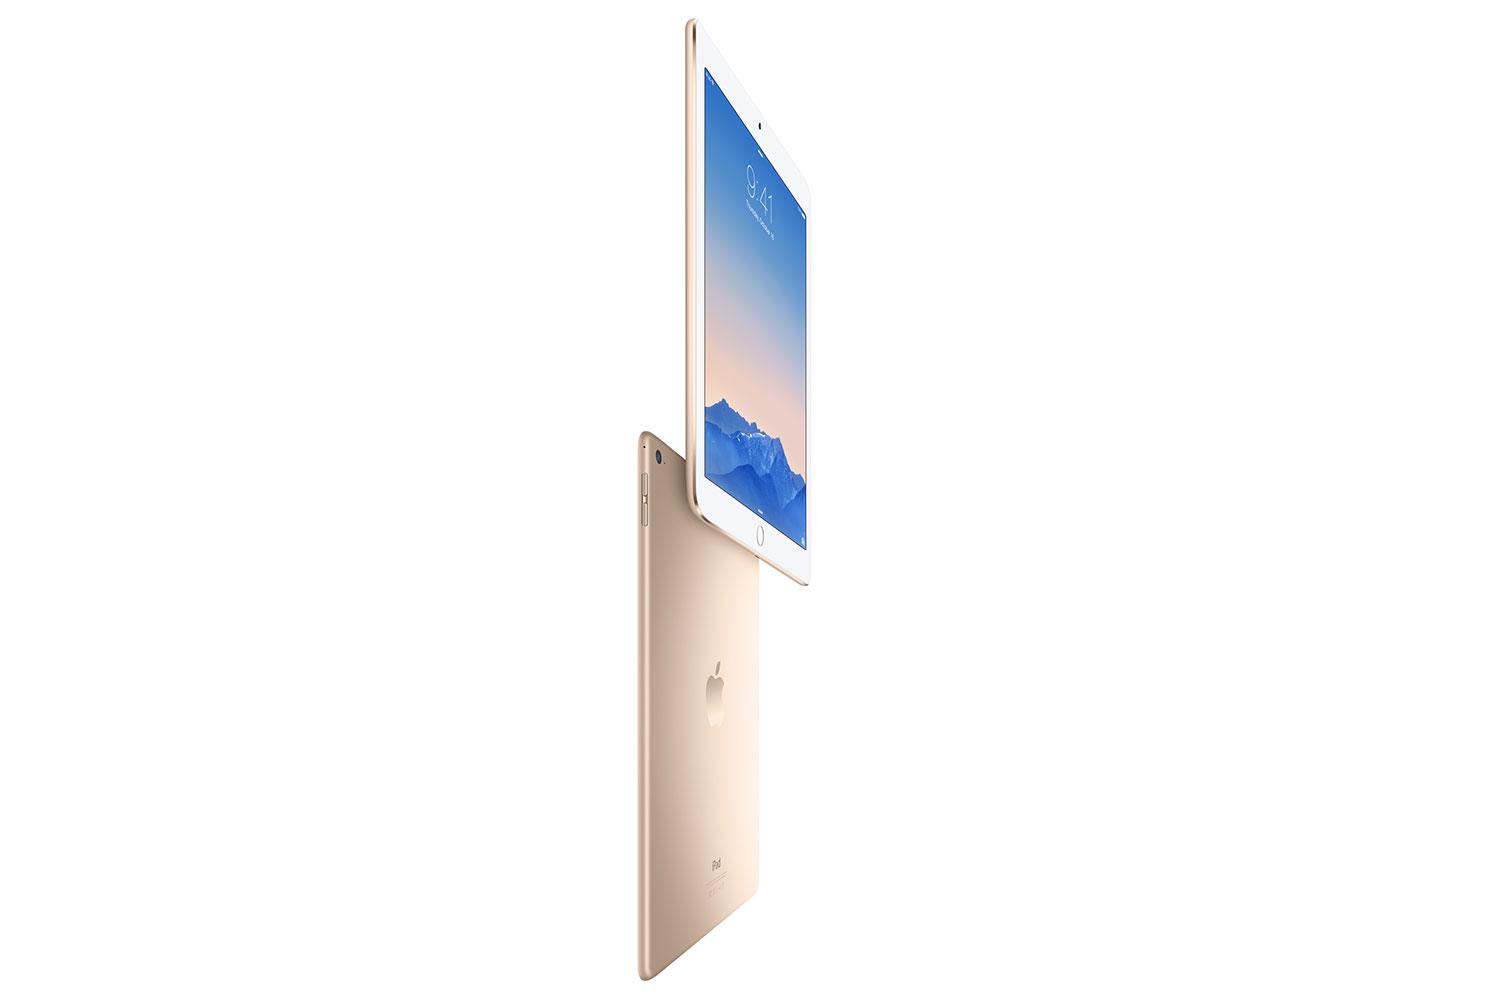 apple ipad air 2 mini 3 launch event news stacked press image